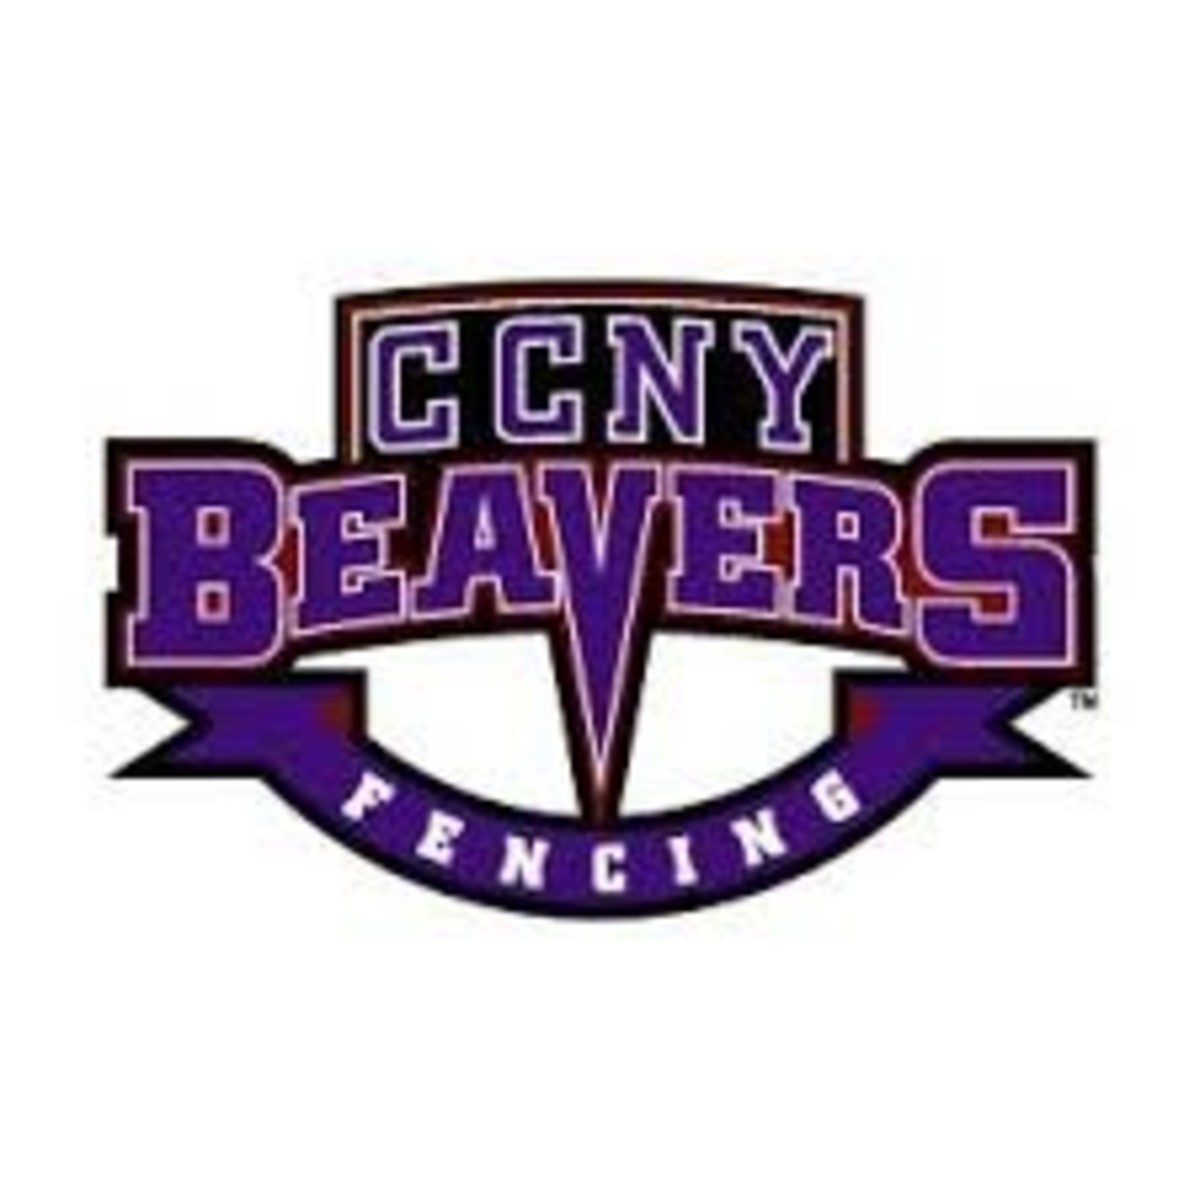 Some Random Stories About Fencers and Coaches of CCNY